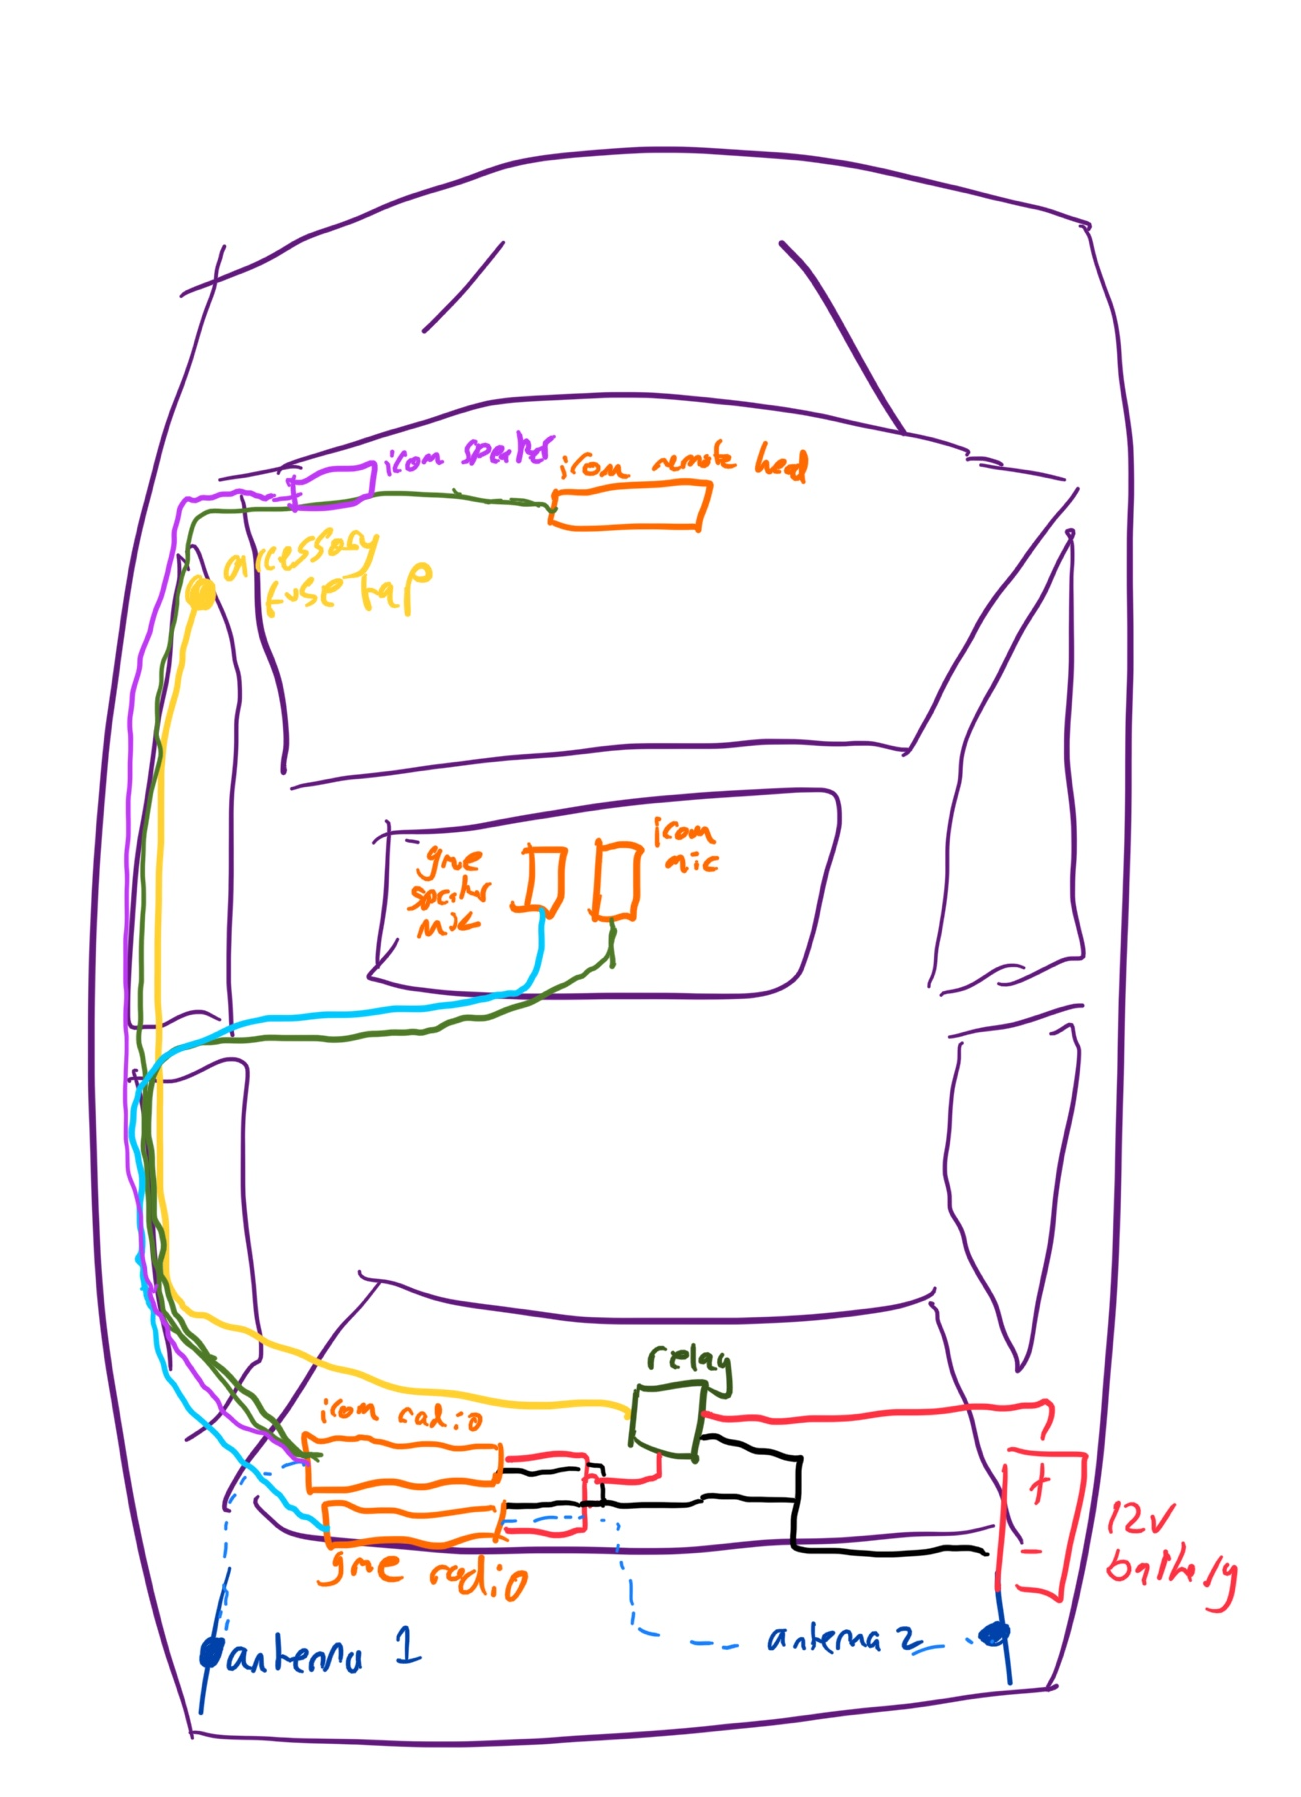 A sketch of a sedan from above, showing the layout of key items and cables. A speaker and radio remote head are shown in the front of the vehicle, along with a fuse tap. In the center of the vehicle are two handheld microphones. At the rear of the vehicle are two radios, a relay, the 12v battery, one antenna on the left and one antenna on the right. All cabling is wired up and down the left hand side of the vehicle.